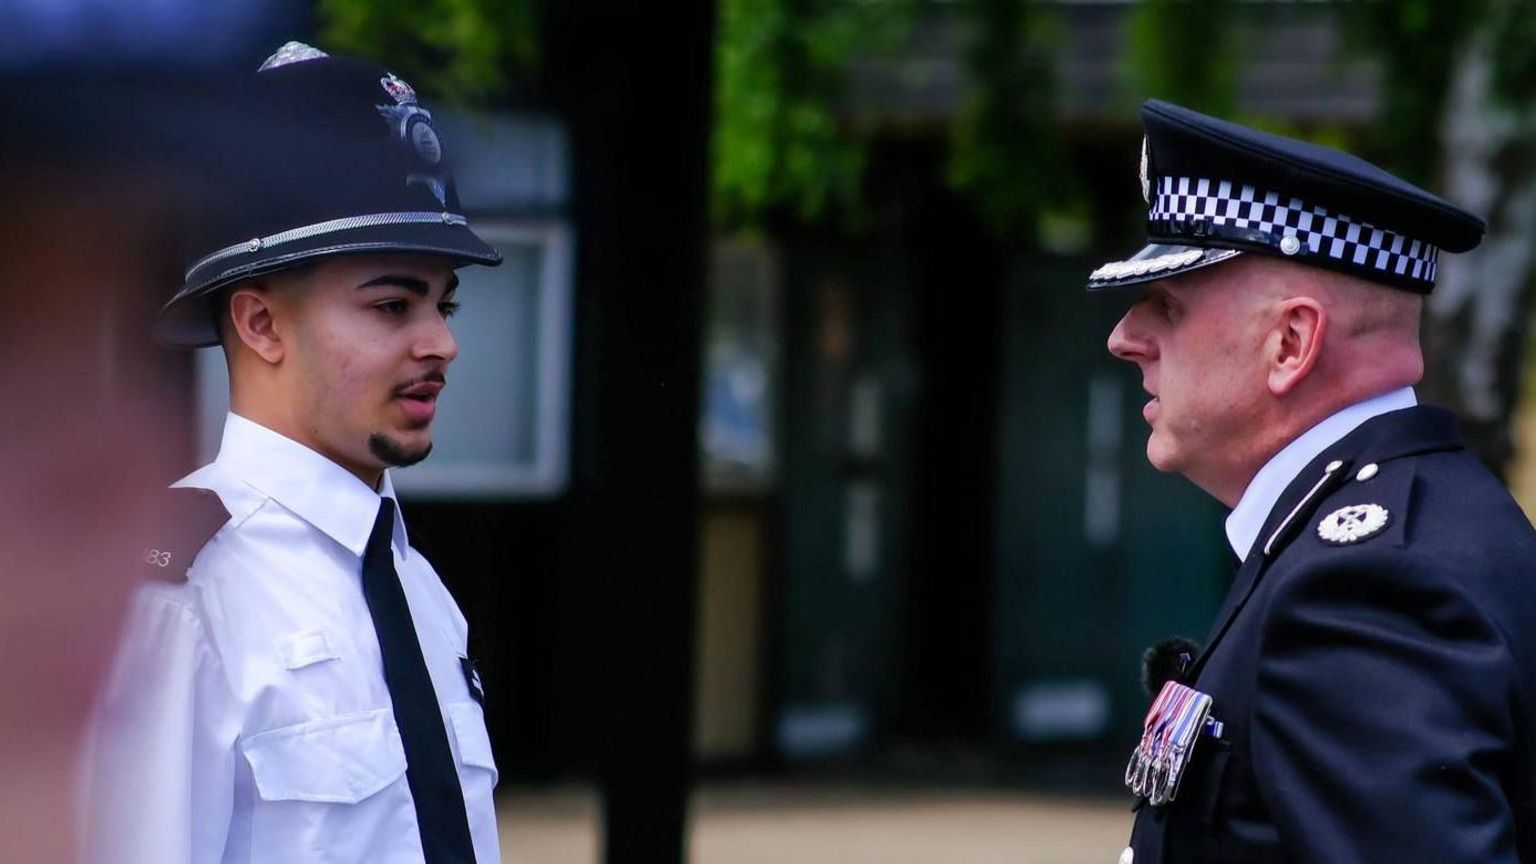 A police recruit with Assistant Chief Constable Vaughan Lukey